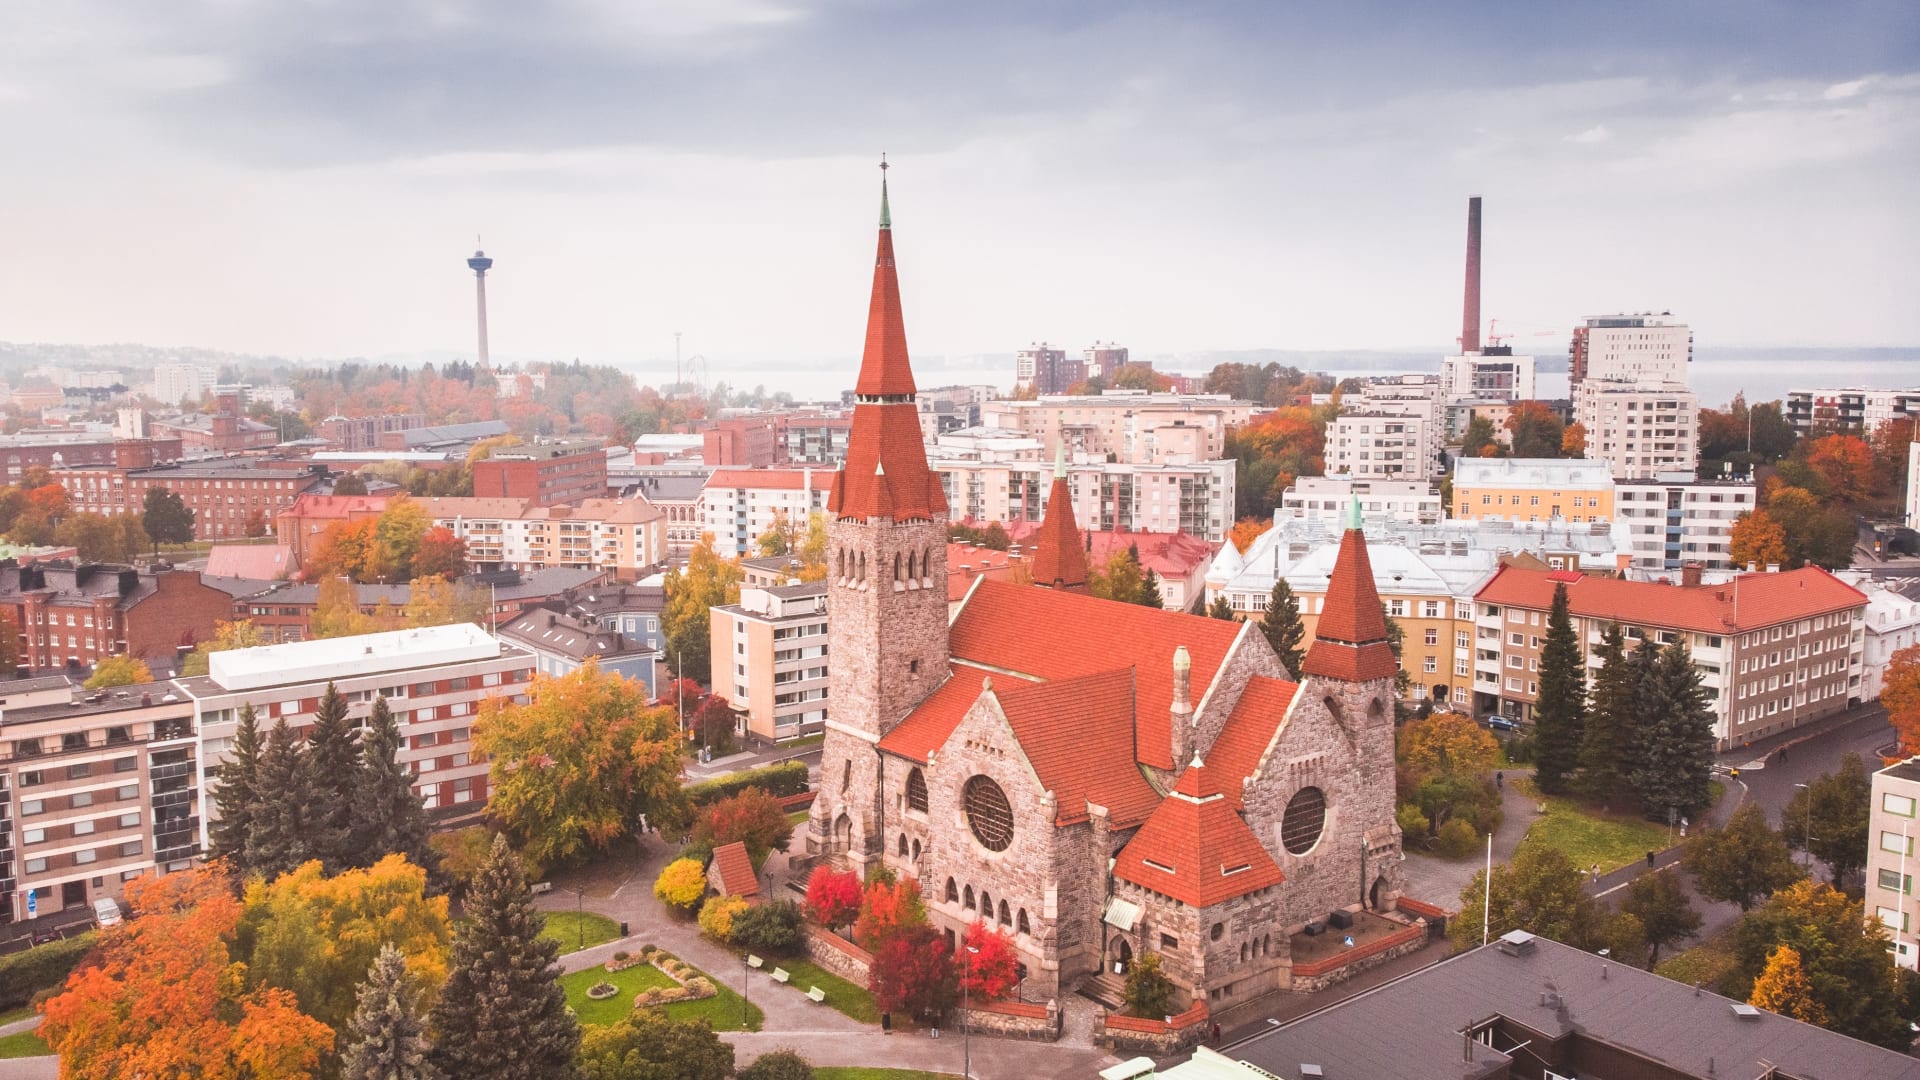 Aerial view of the Tampere Cathedral towering over the city.